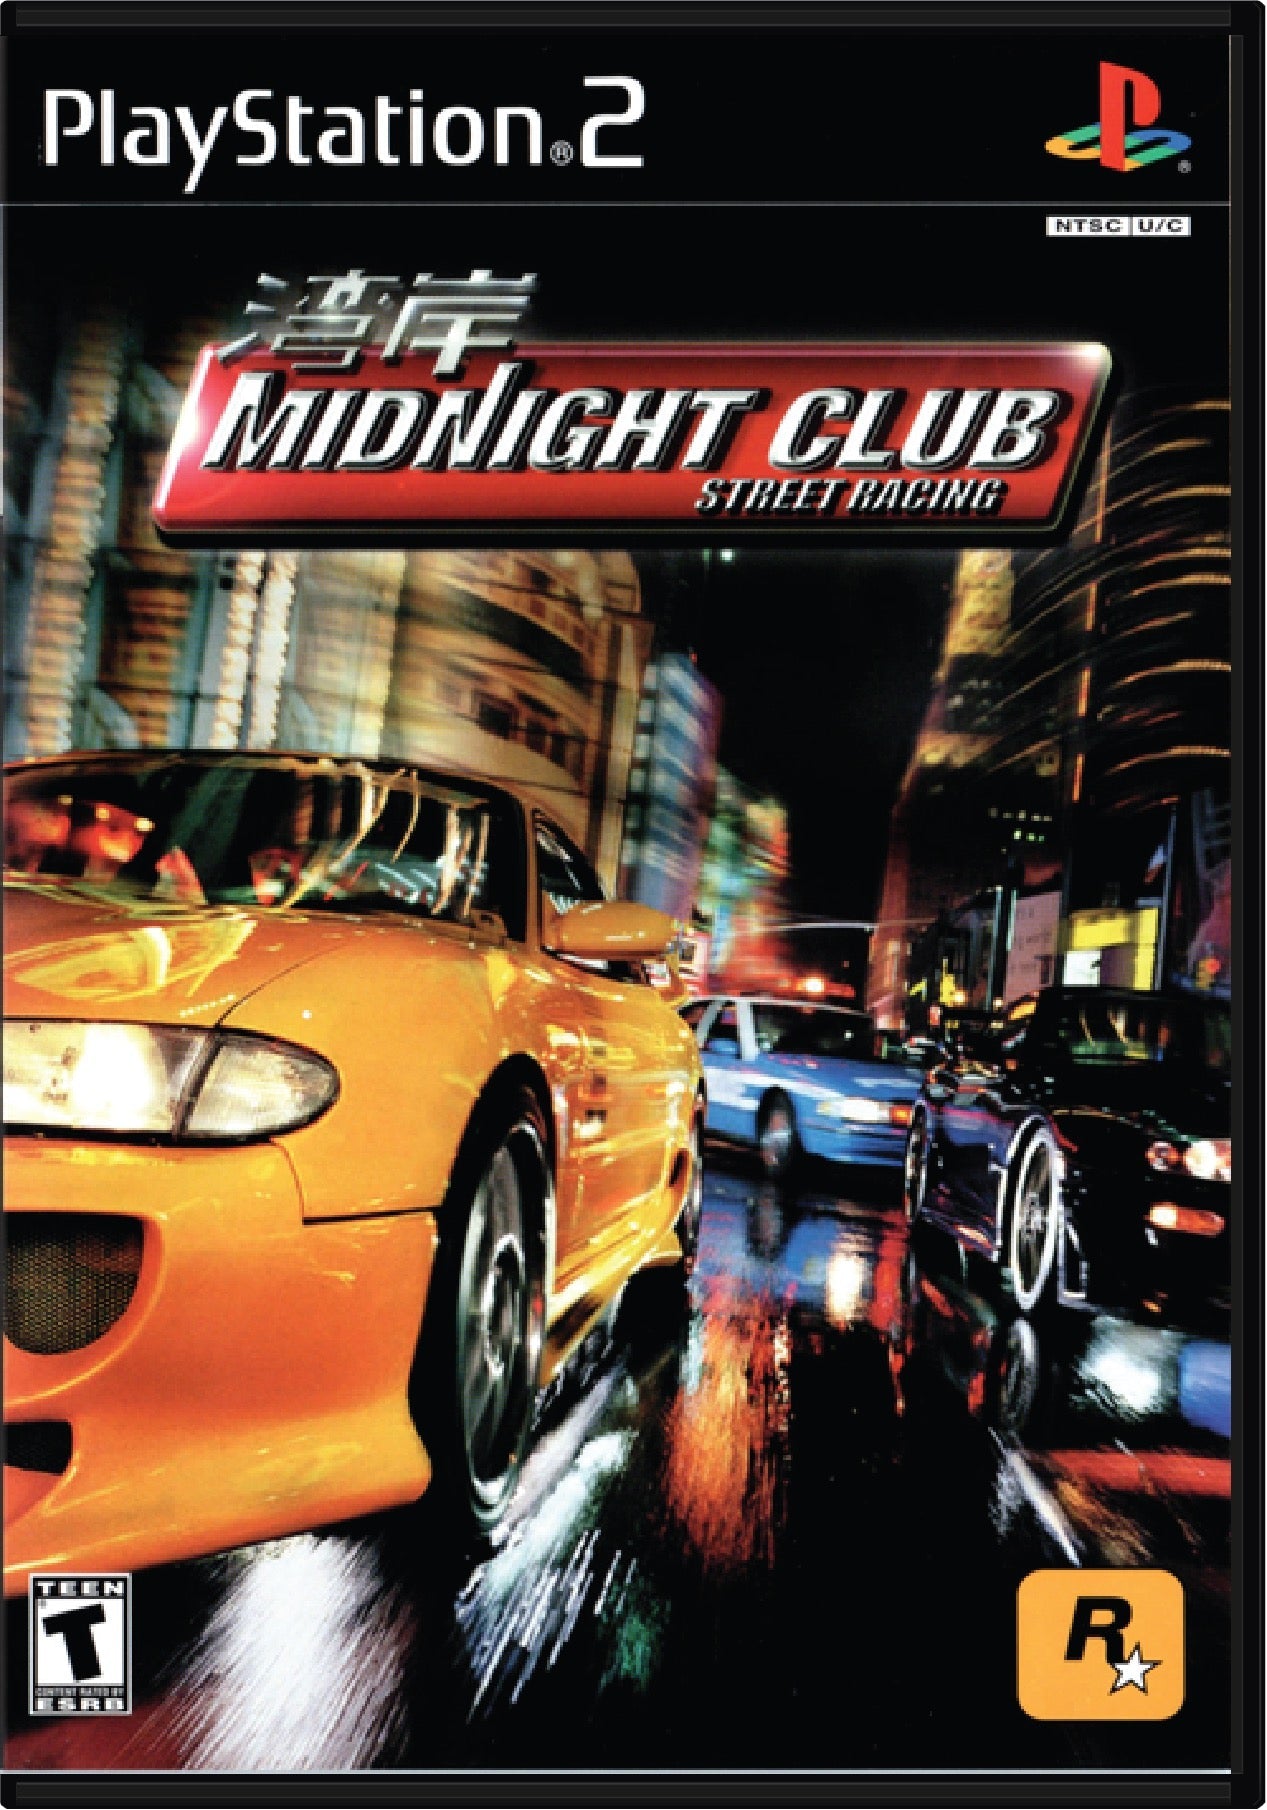 Midnight Club Street Racing Cover Art and Product Photo